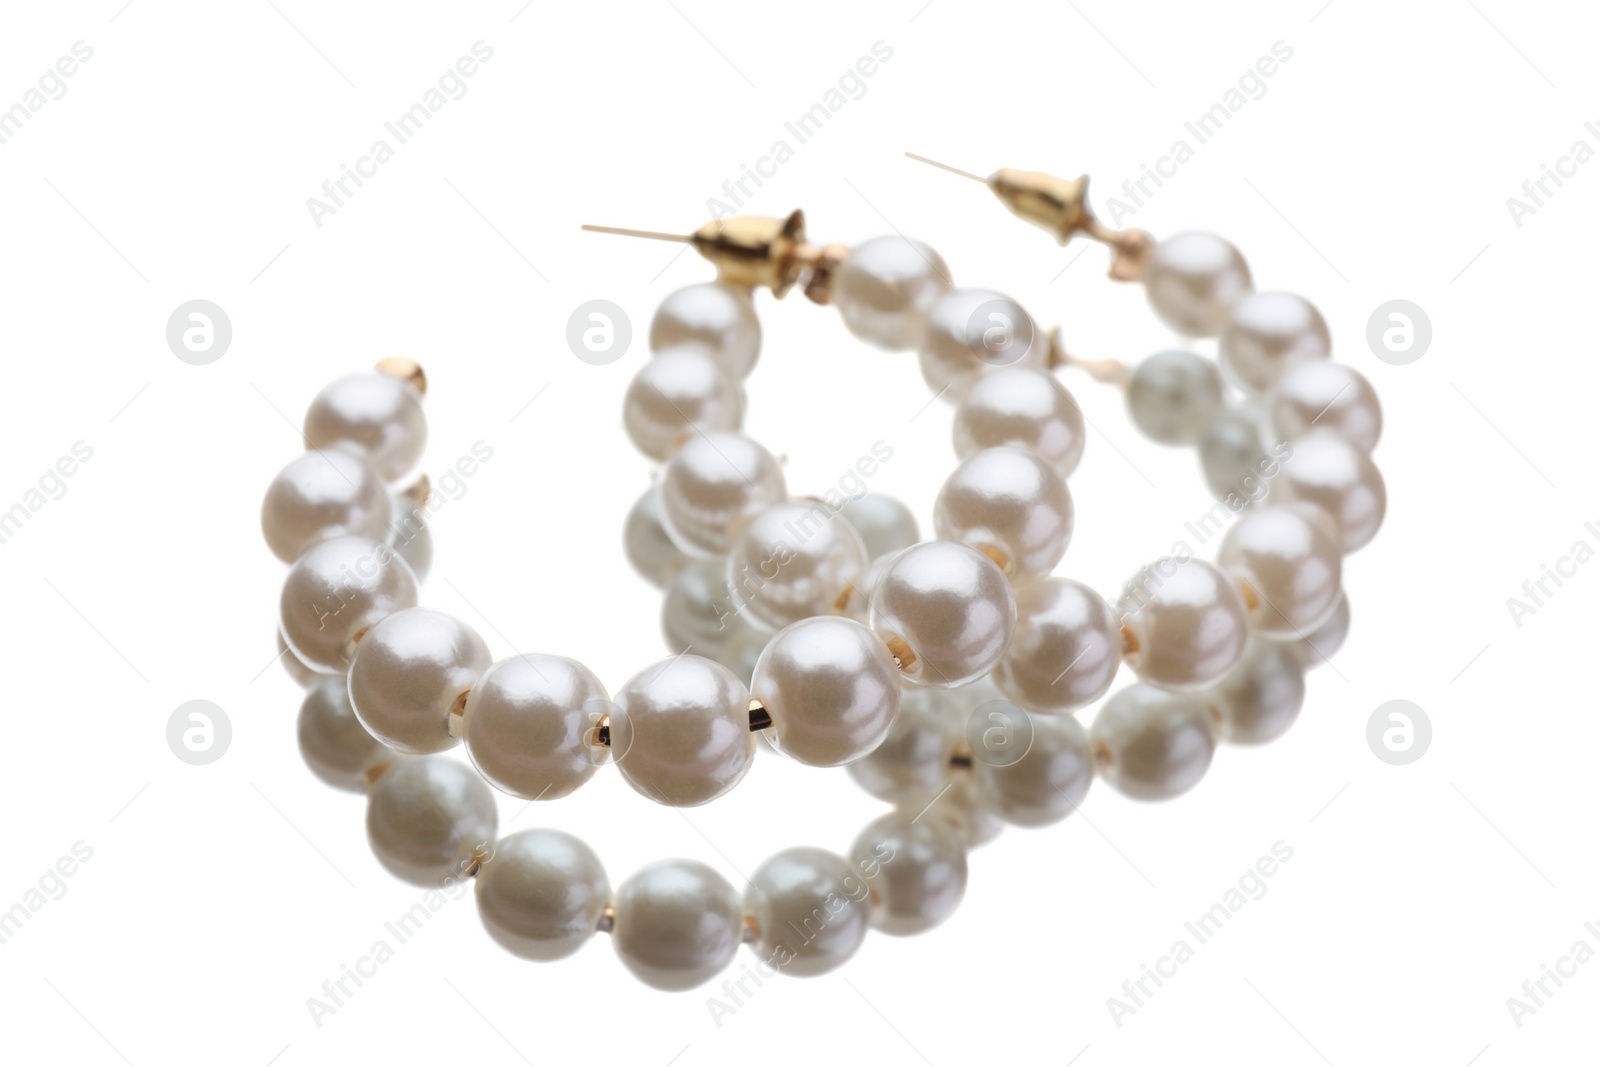 Photo of Elegant earrings with pearls on mirror surface